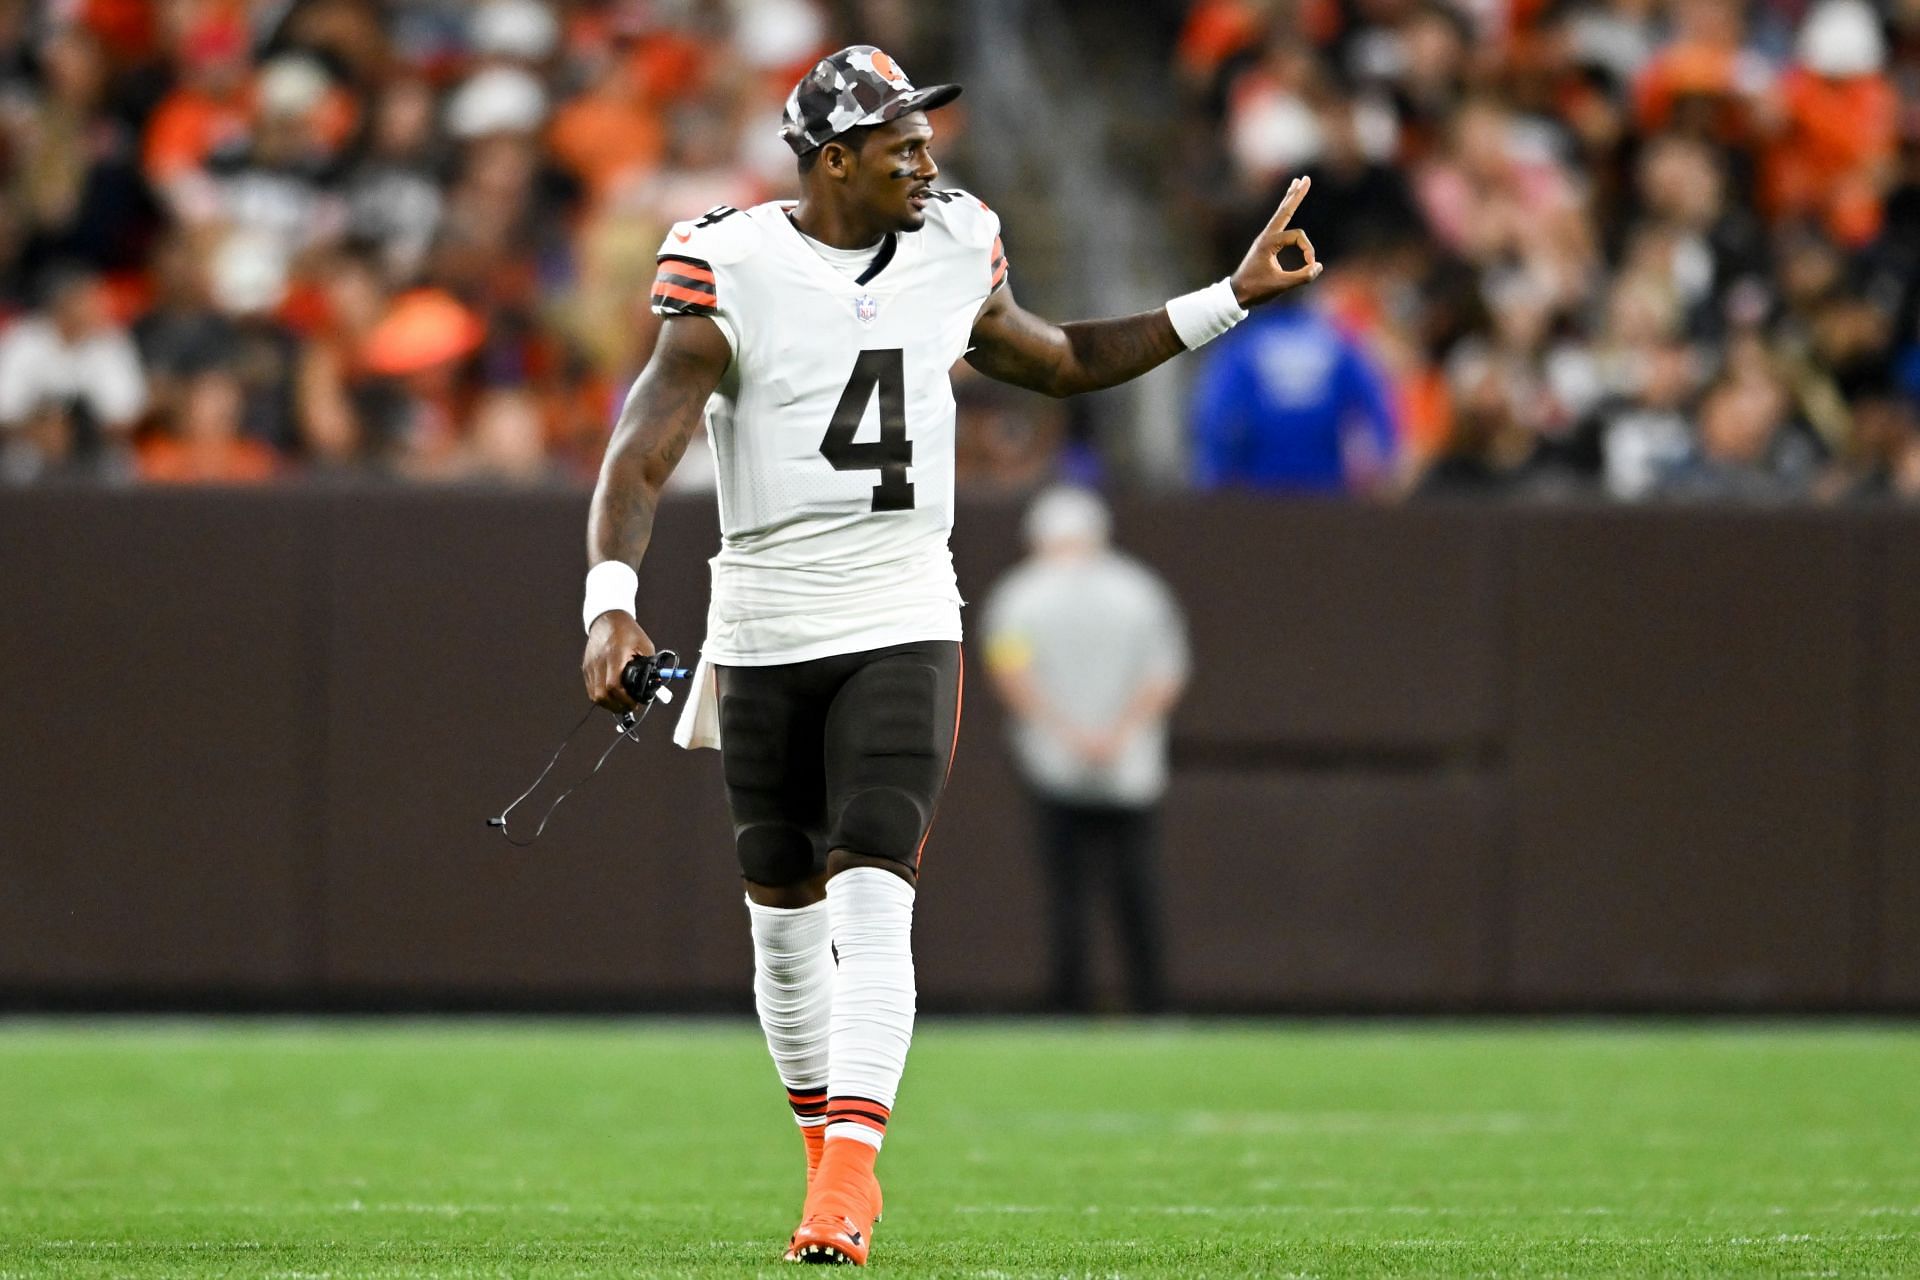 Is Deshaun Watson playing tonight? Status of the Browns QB ahead of revenge game with the Houston Texans